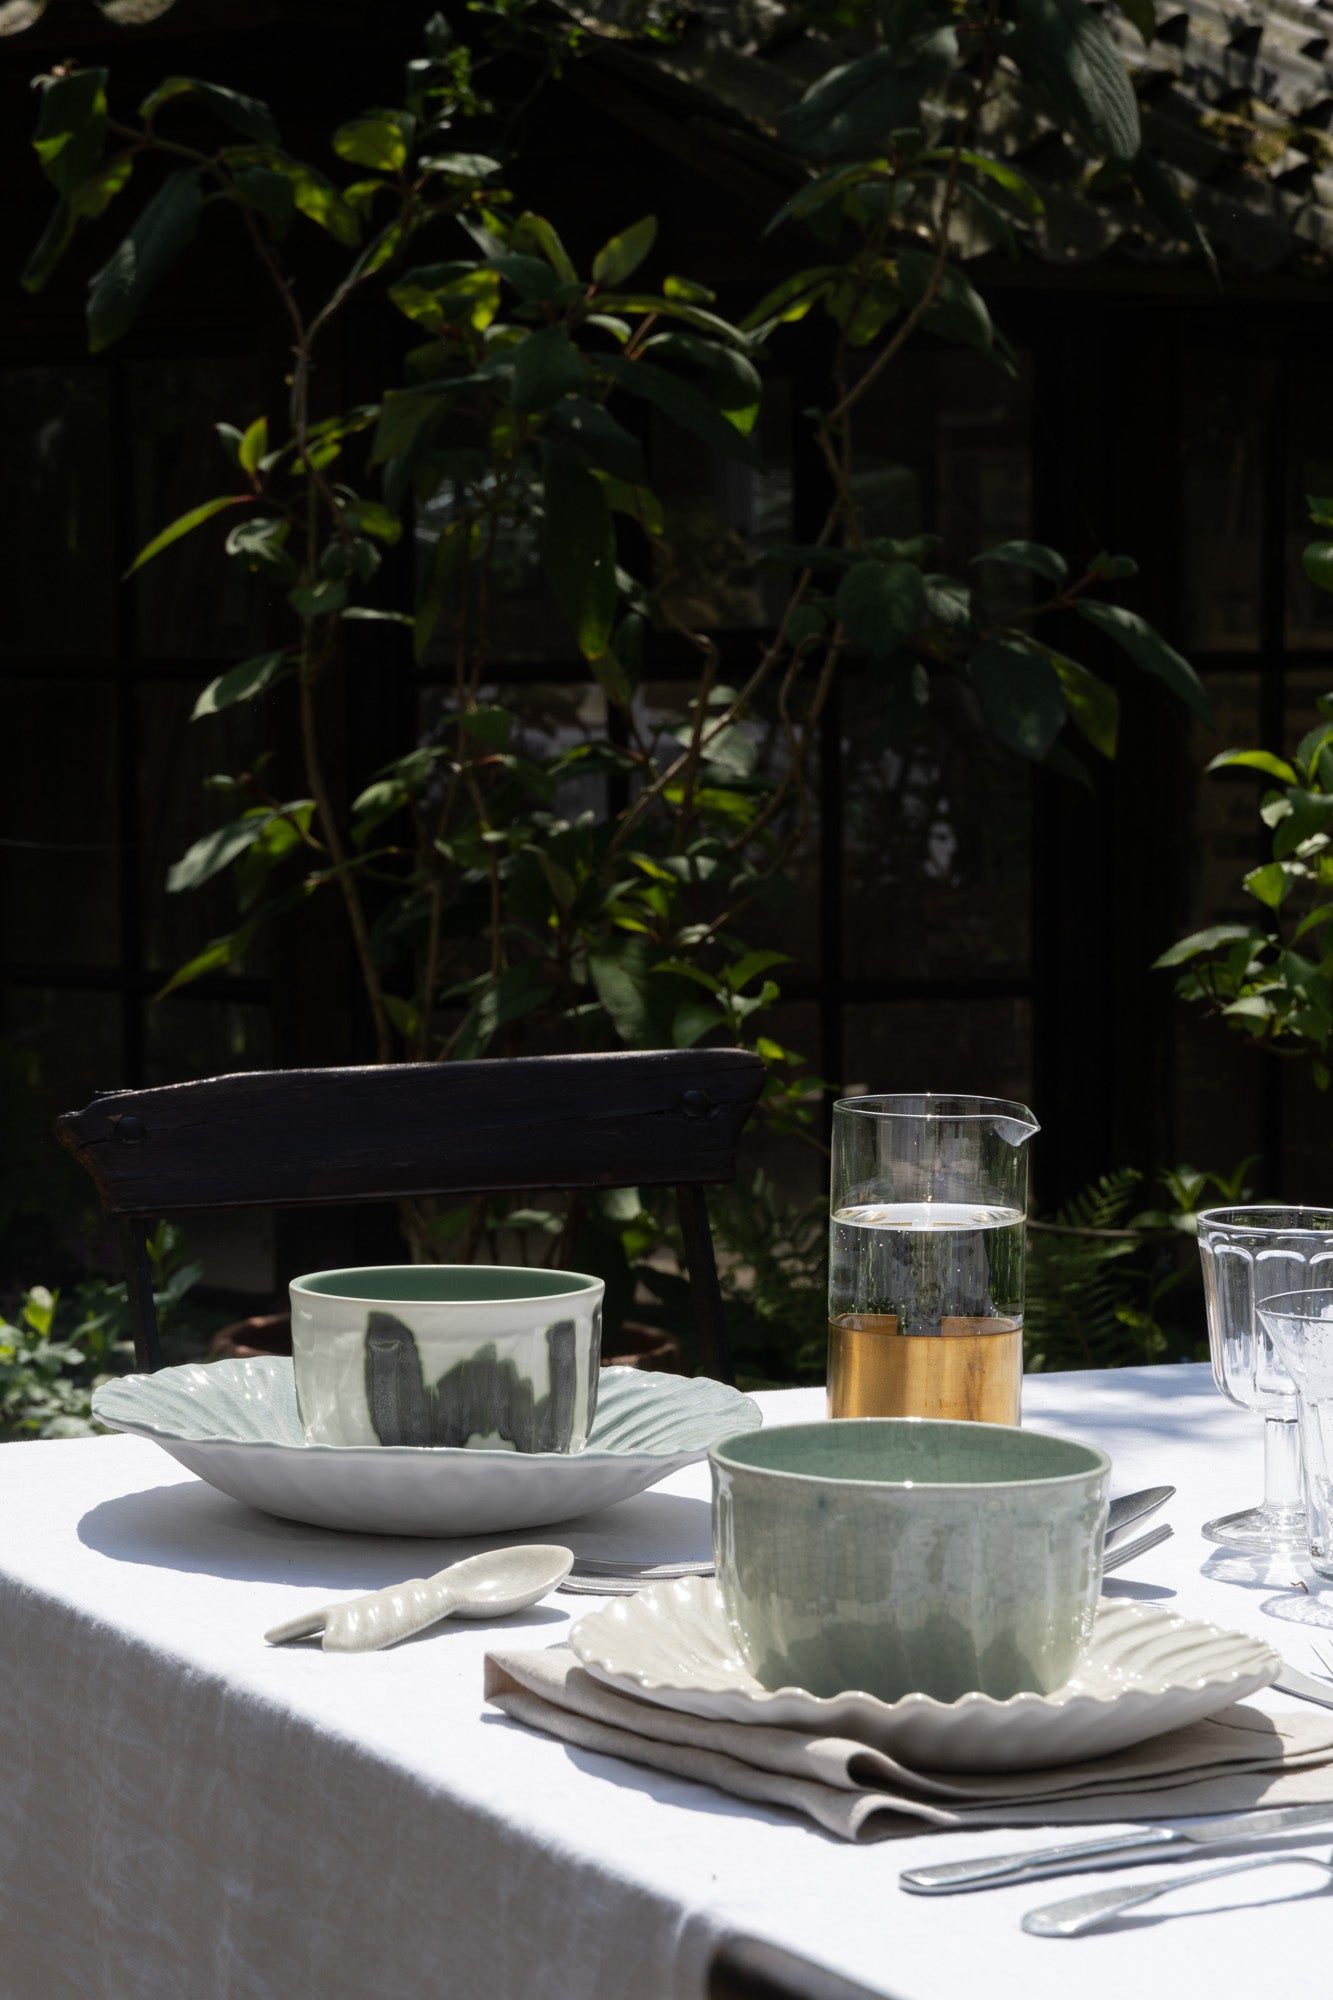 Jars Ceramistes Dashi Bowl in use for outdoors table setting.